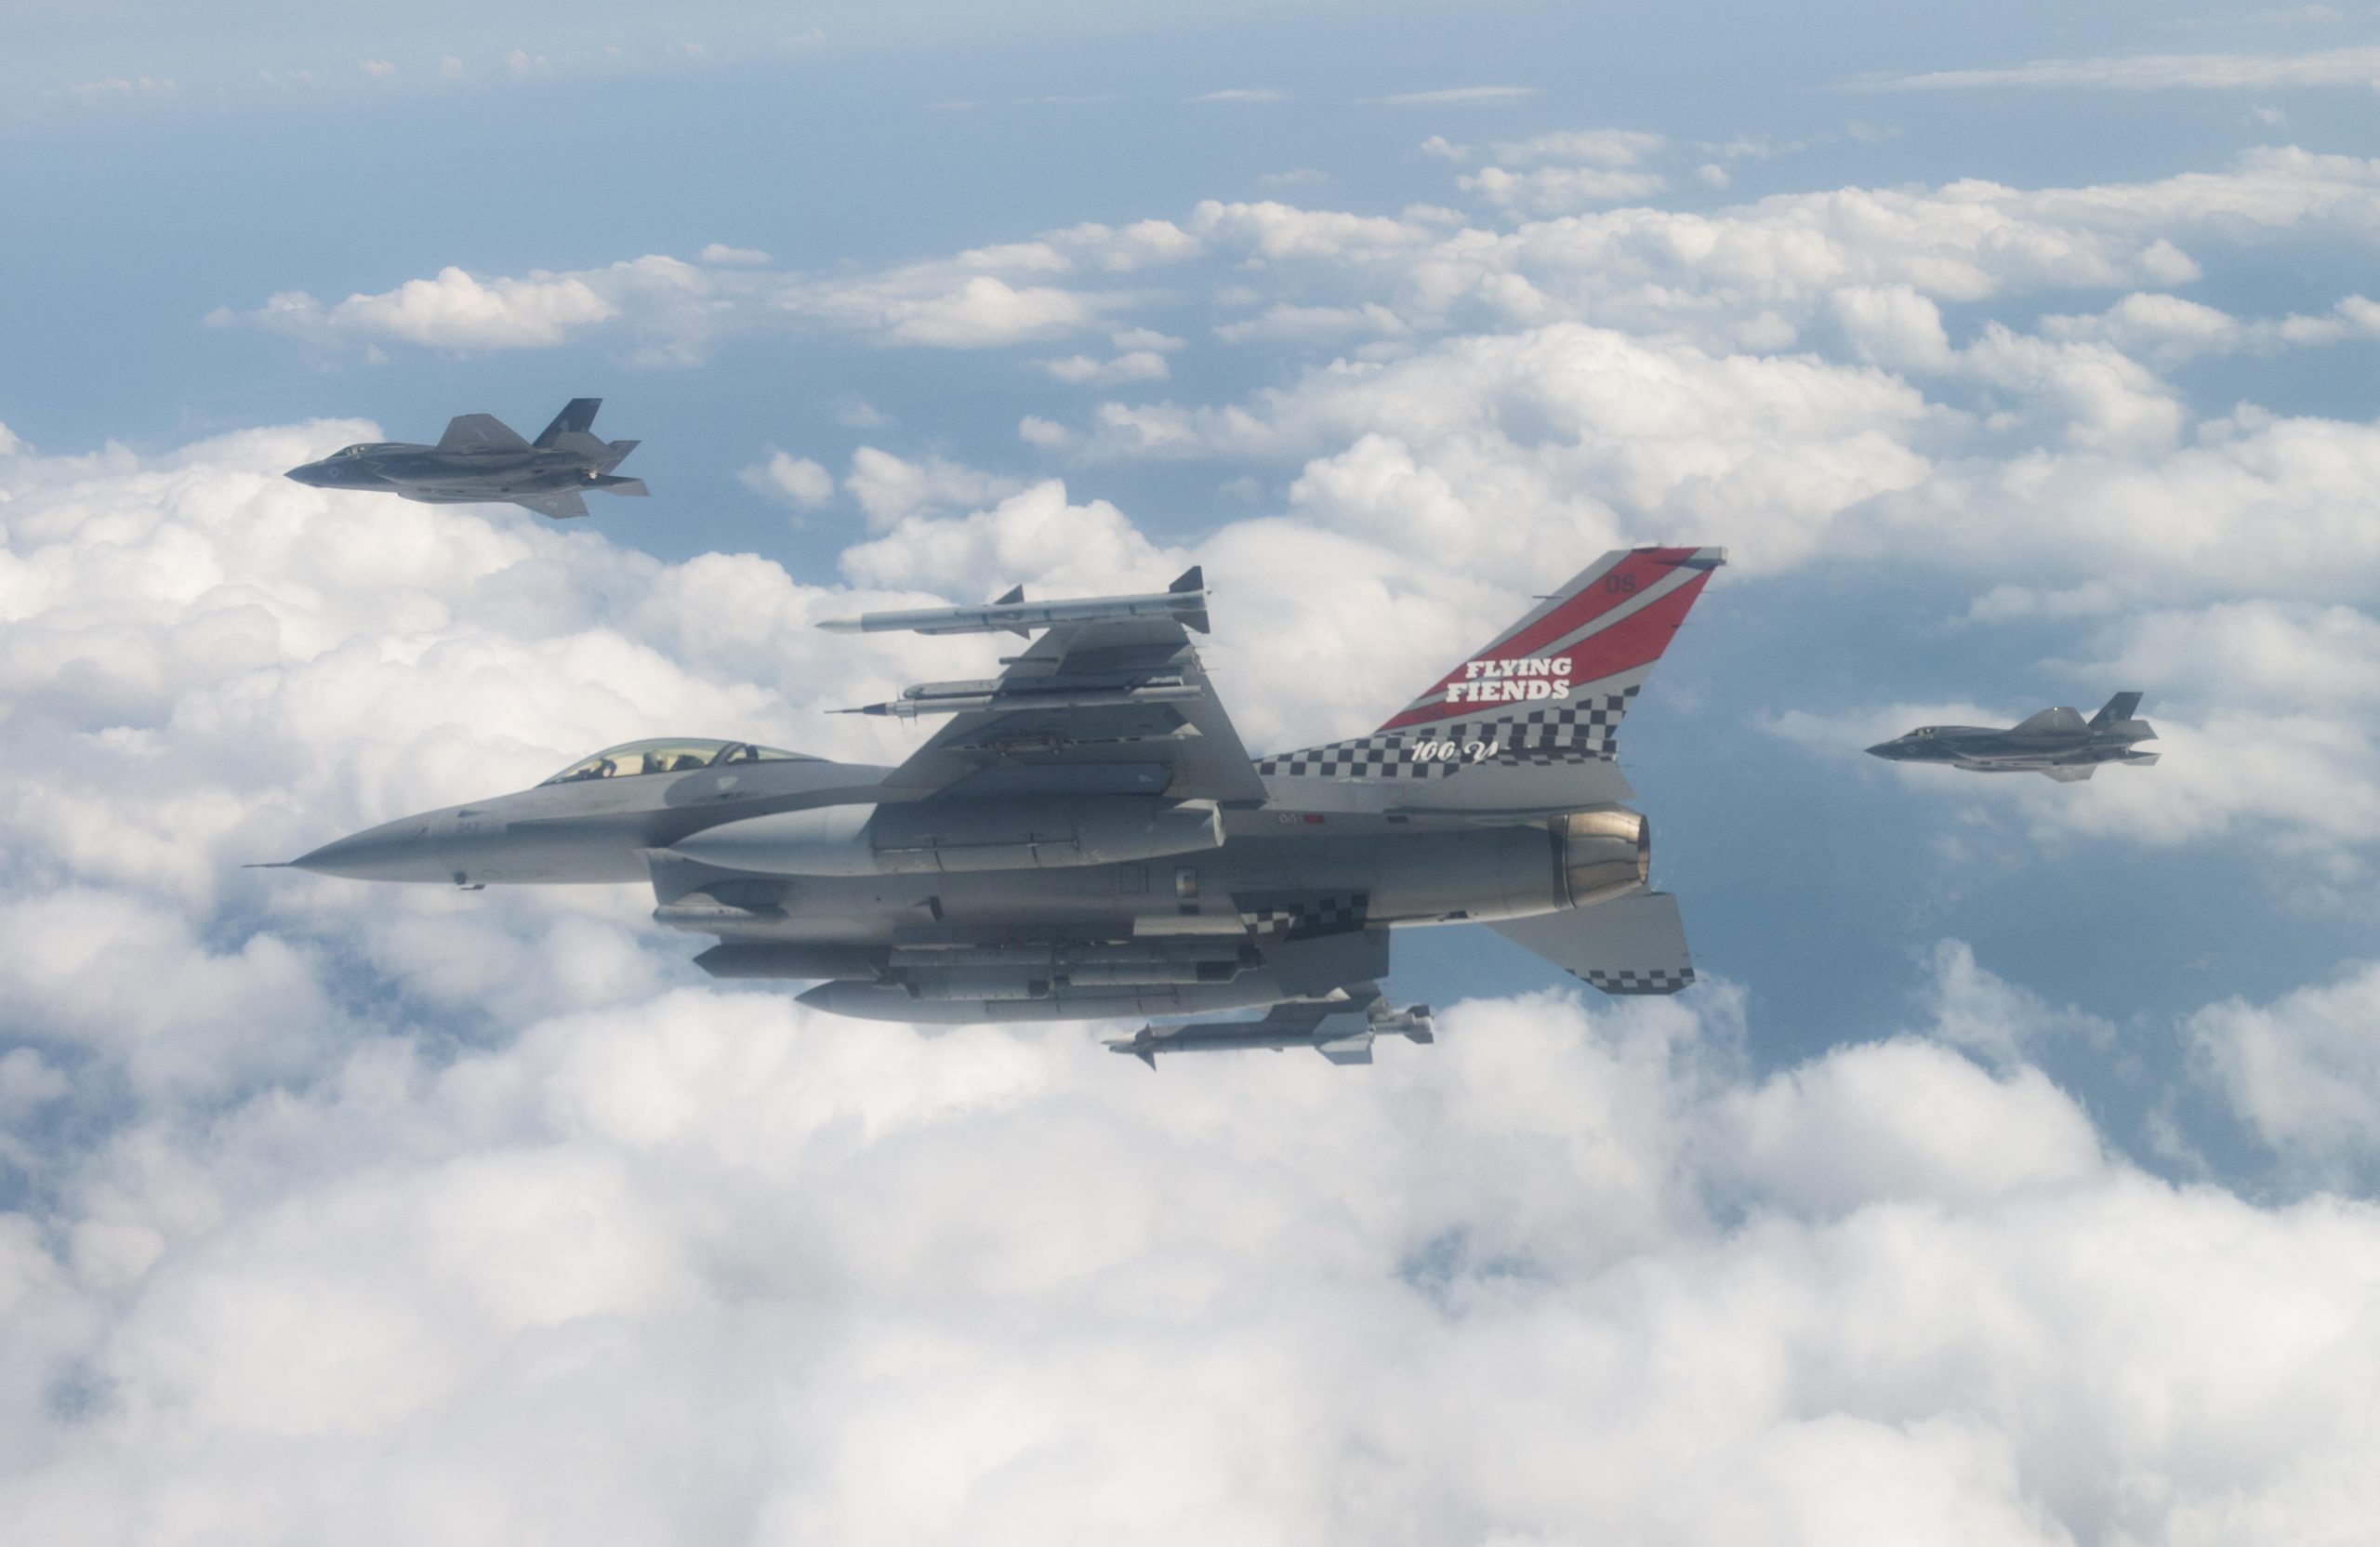 A U.S. Air Force F-16 Fighting Falcon assigned to the 51st Fighter Wing at Osan Air Base, South Korea, flies with two U.S. Marine Corps F-35B Lightning II stealth fighters over the Korean Peninsula Aug. 30, 2017. This mission was conducted with U.S. Air Force B-1B Lancers in a direct response to North Korea’s intermediate range ballistic missile launch, which flew directly over northern Japan on Aug. 28, 2017 amid rising tension over North Korea’s nuclear and ballistic missile development programs.